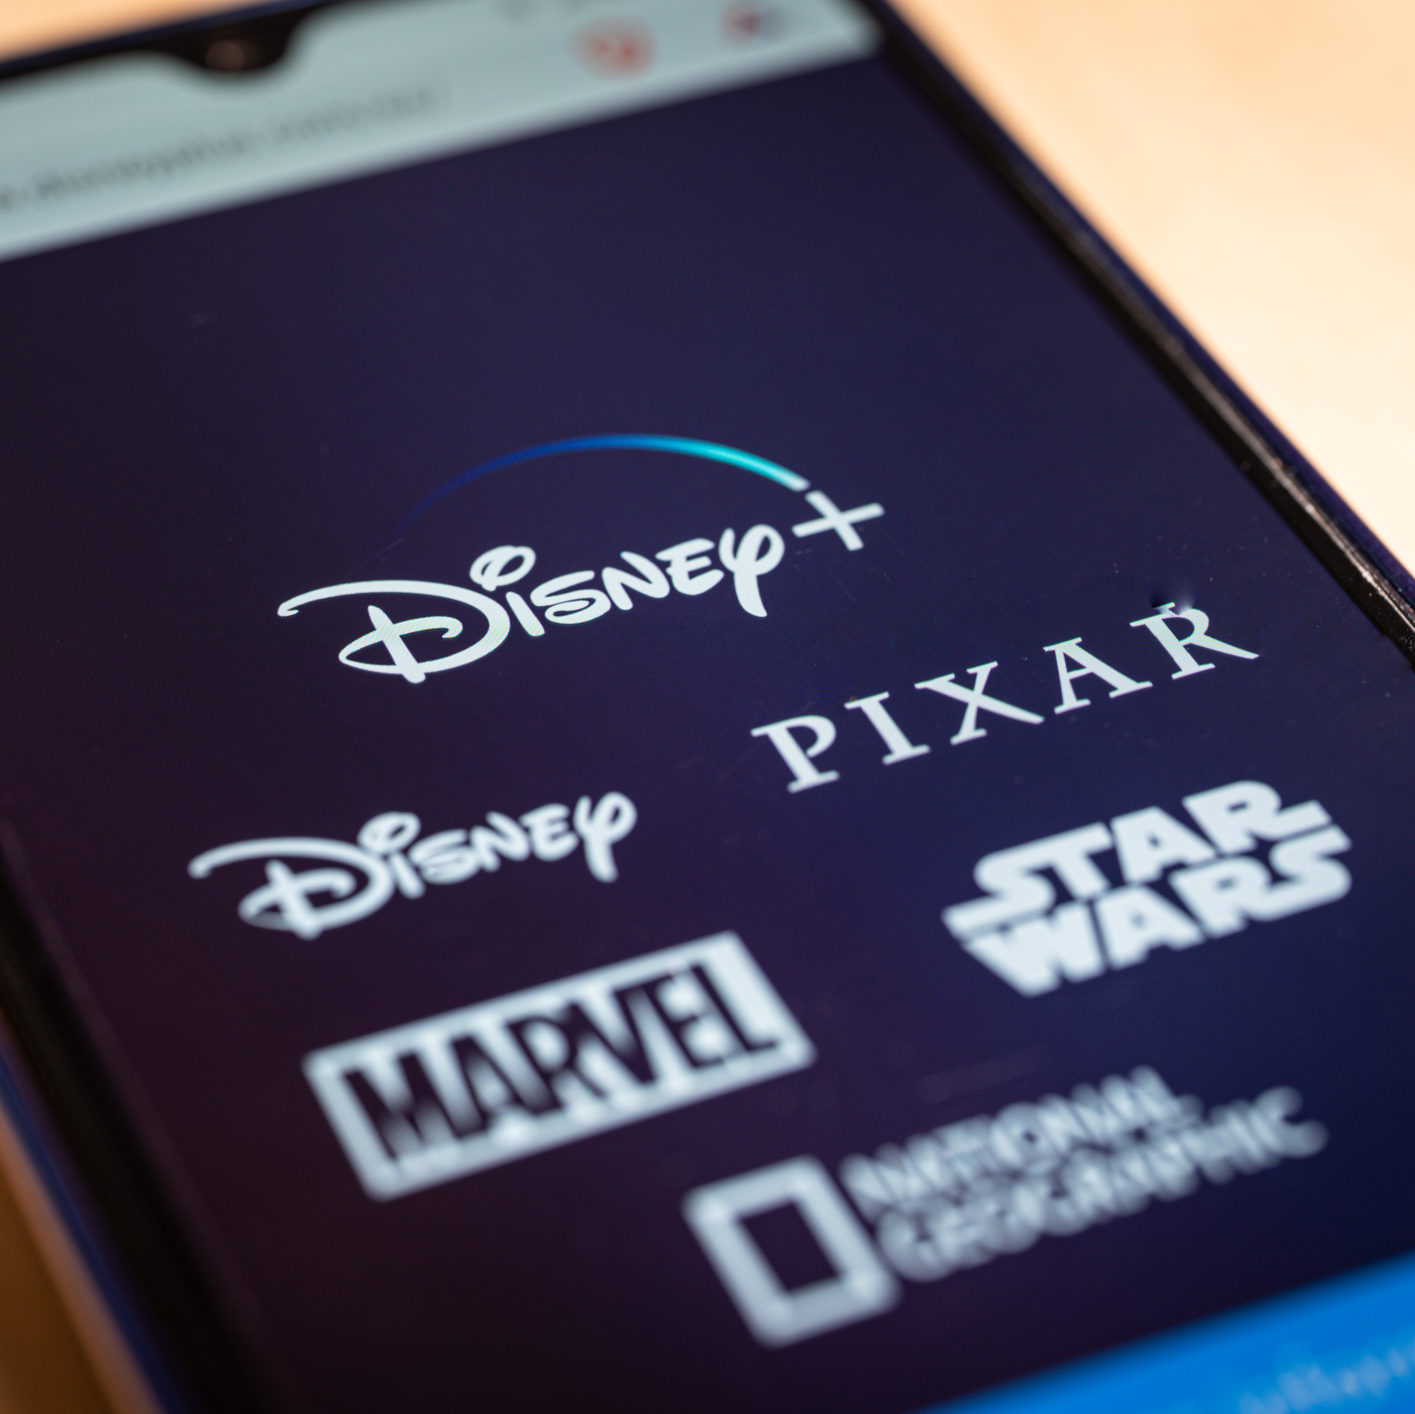 Ends soon! Disney+ is just $2 for the first month